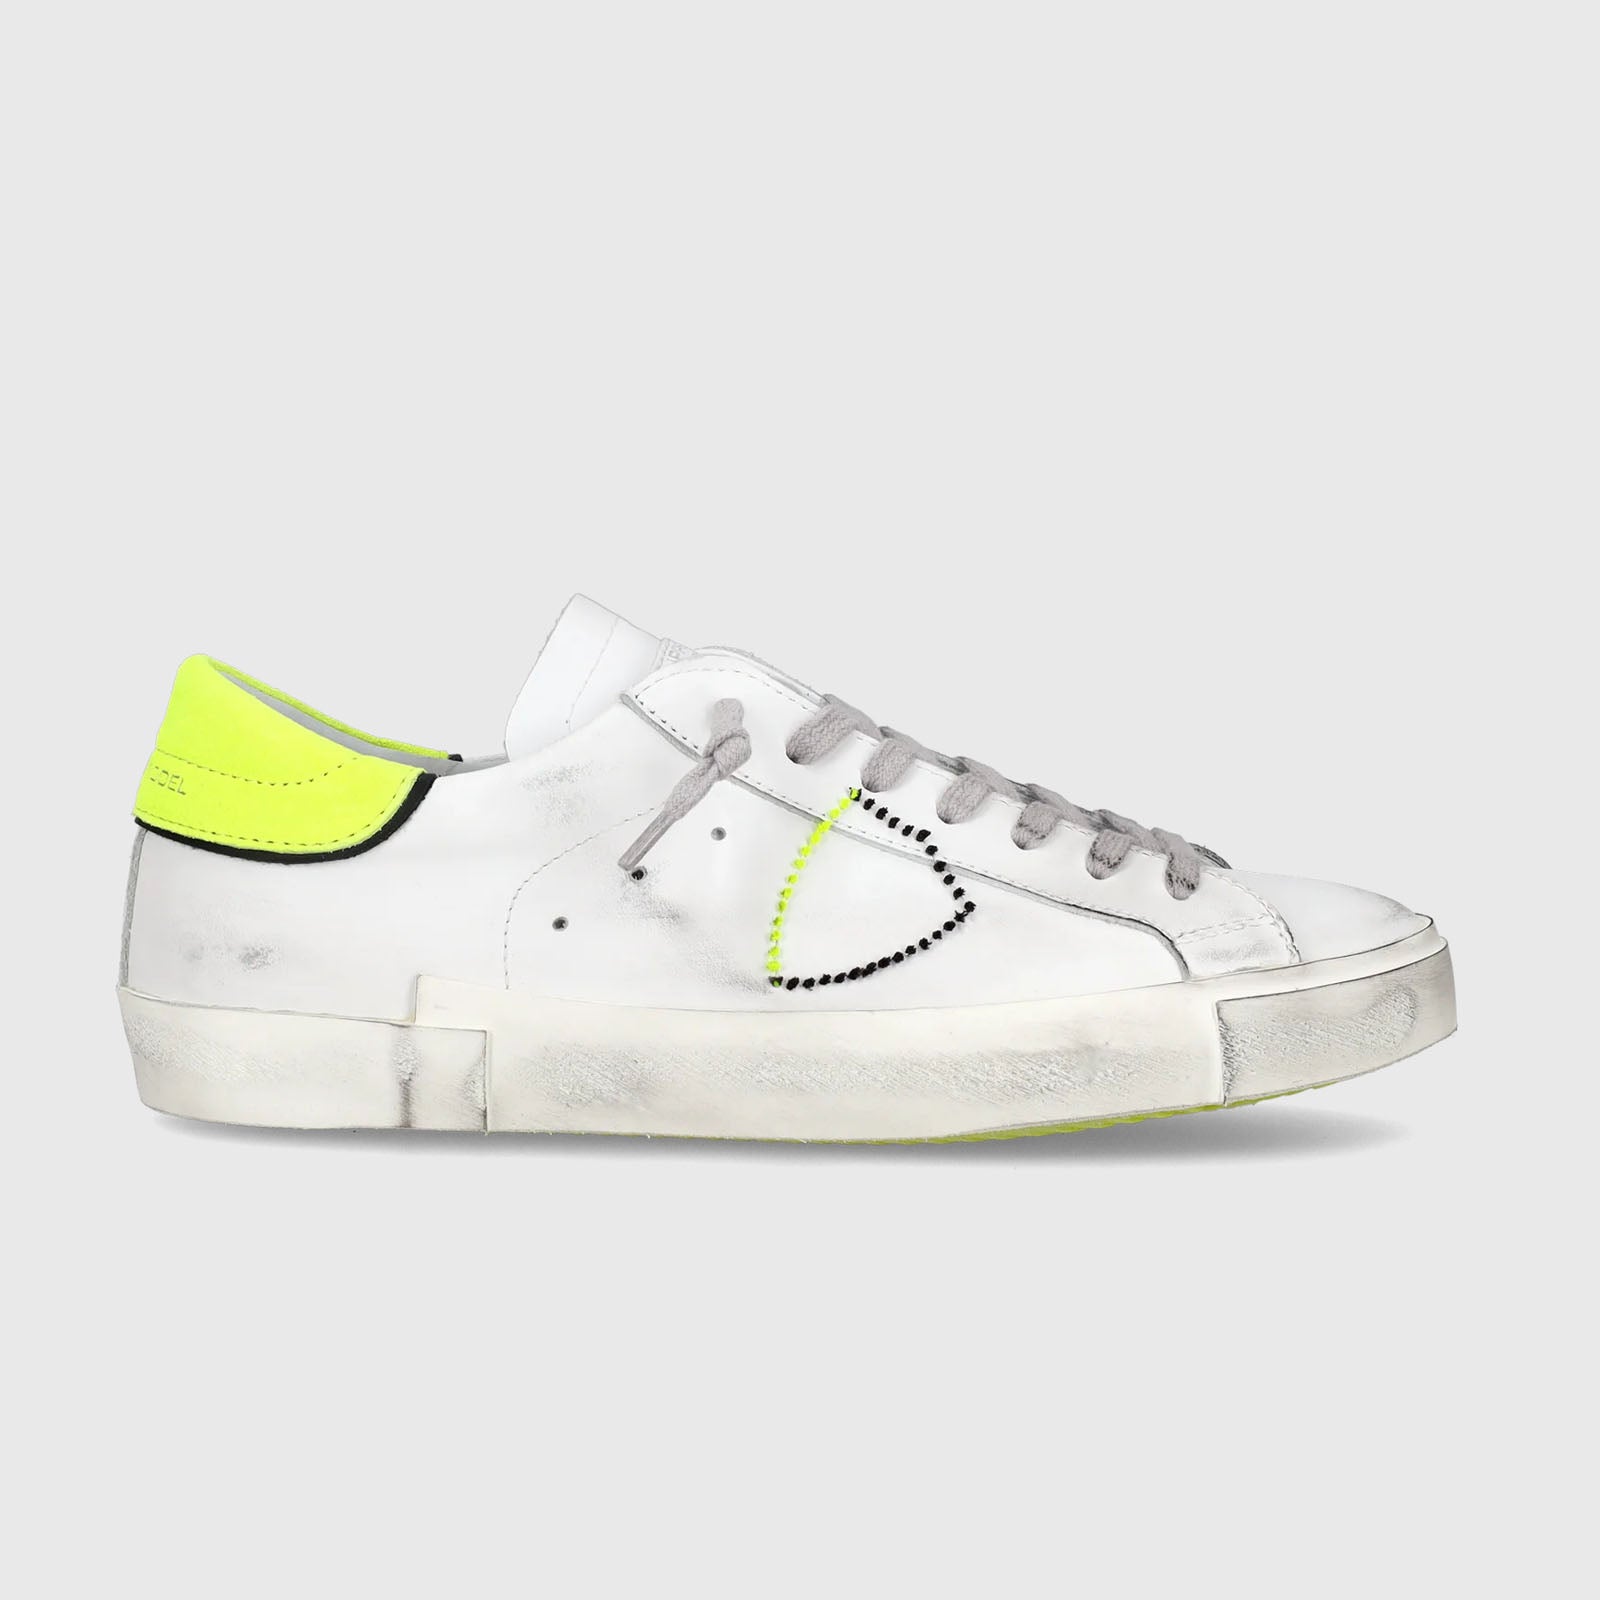 Philippe Model Sneakers PRSX Veau Broderie Leather White/Yellow Fluo - 7